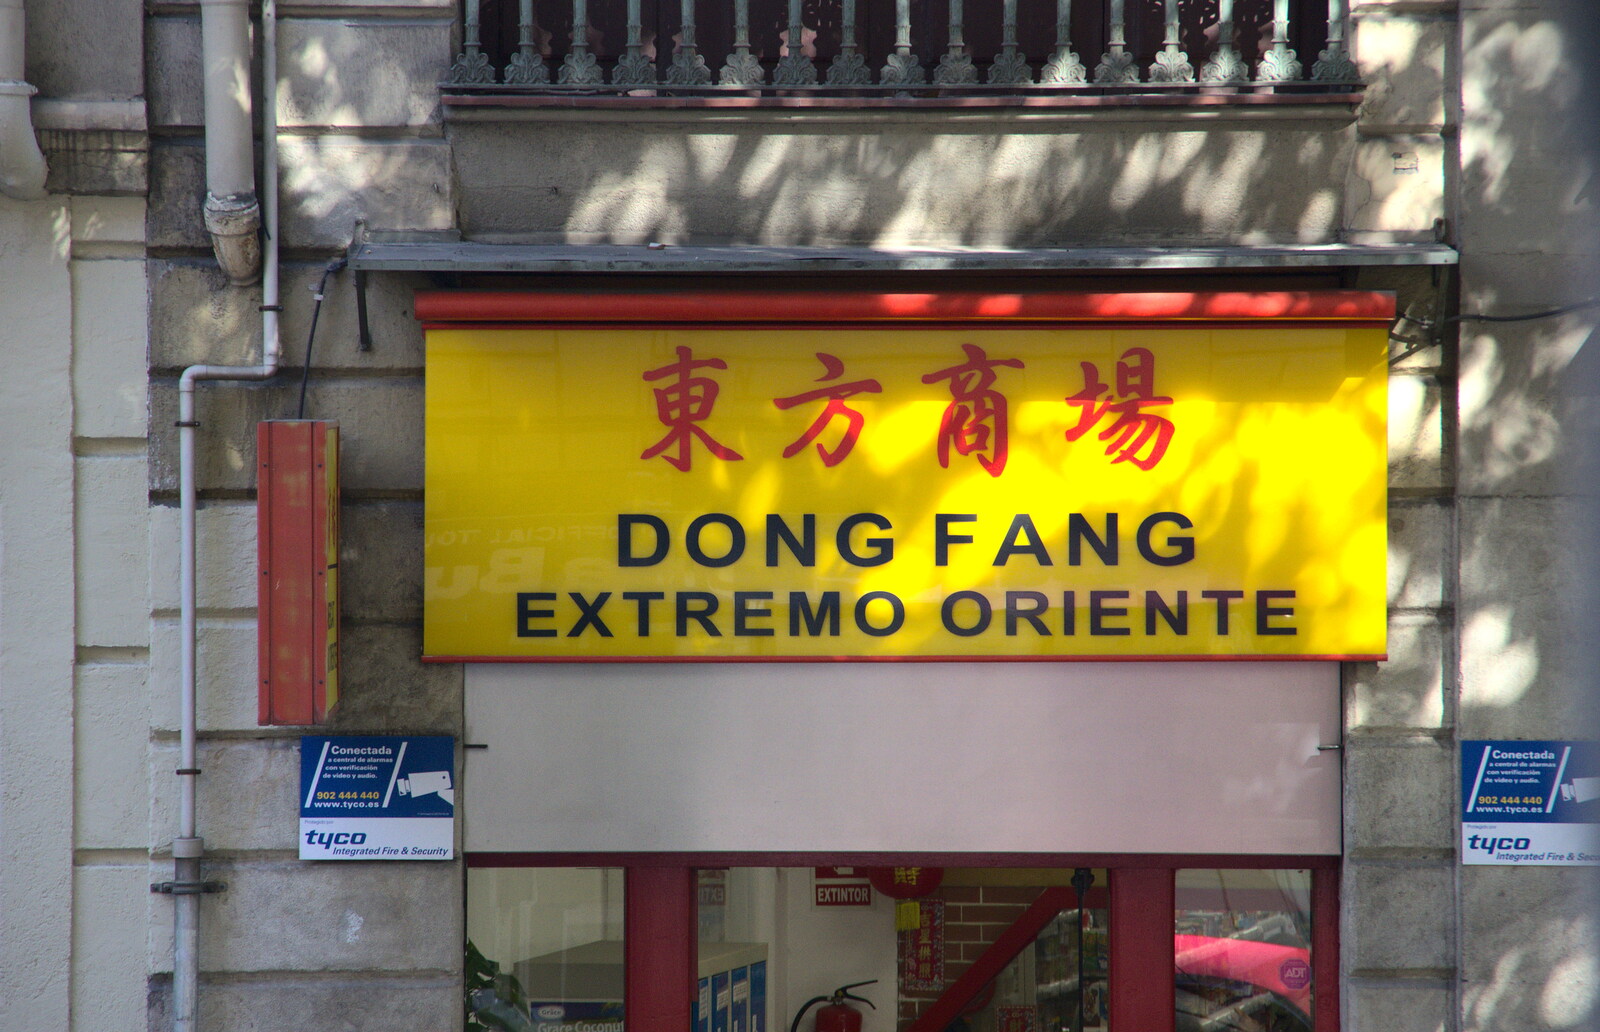 Dong Fang - extreme Orient from A Barcelona Bus Tour, Catalonia, Spain - 25th October 2017